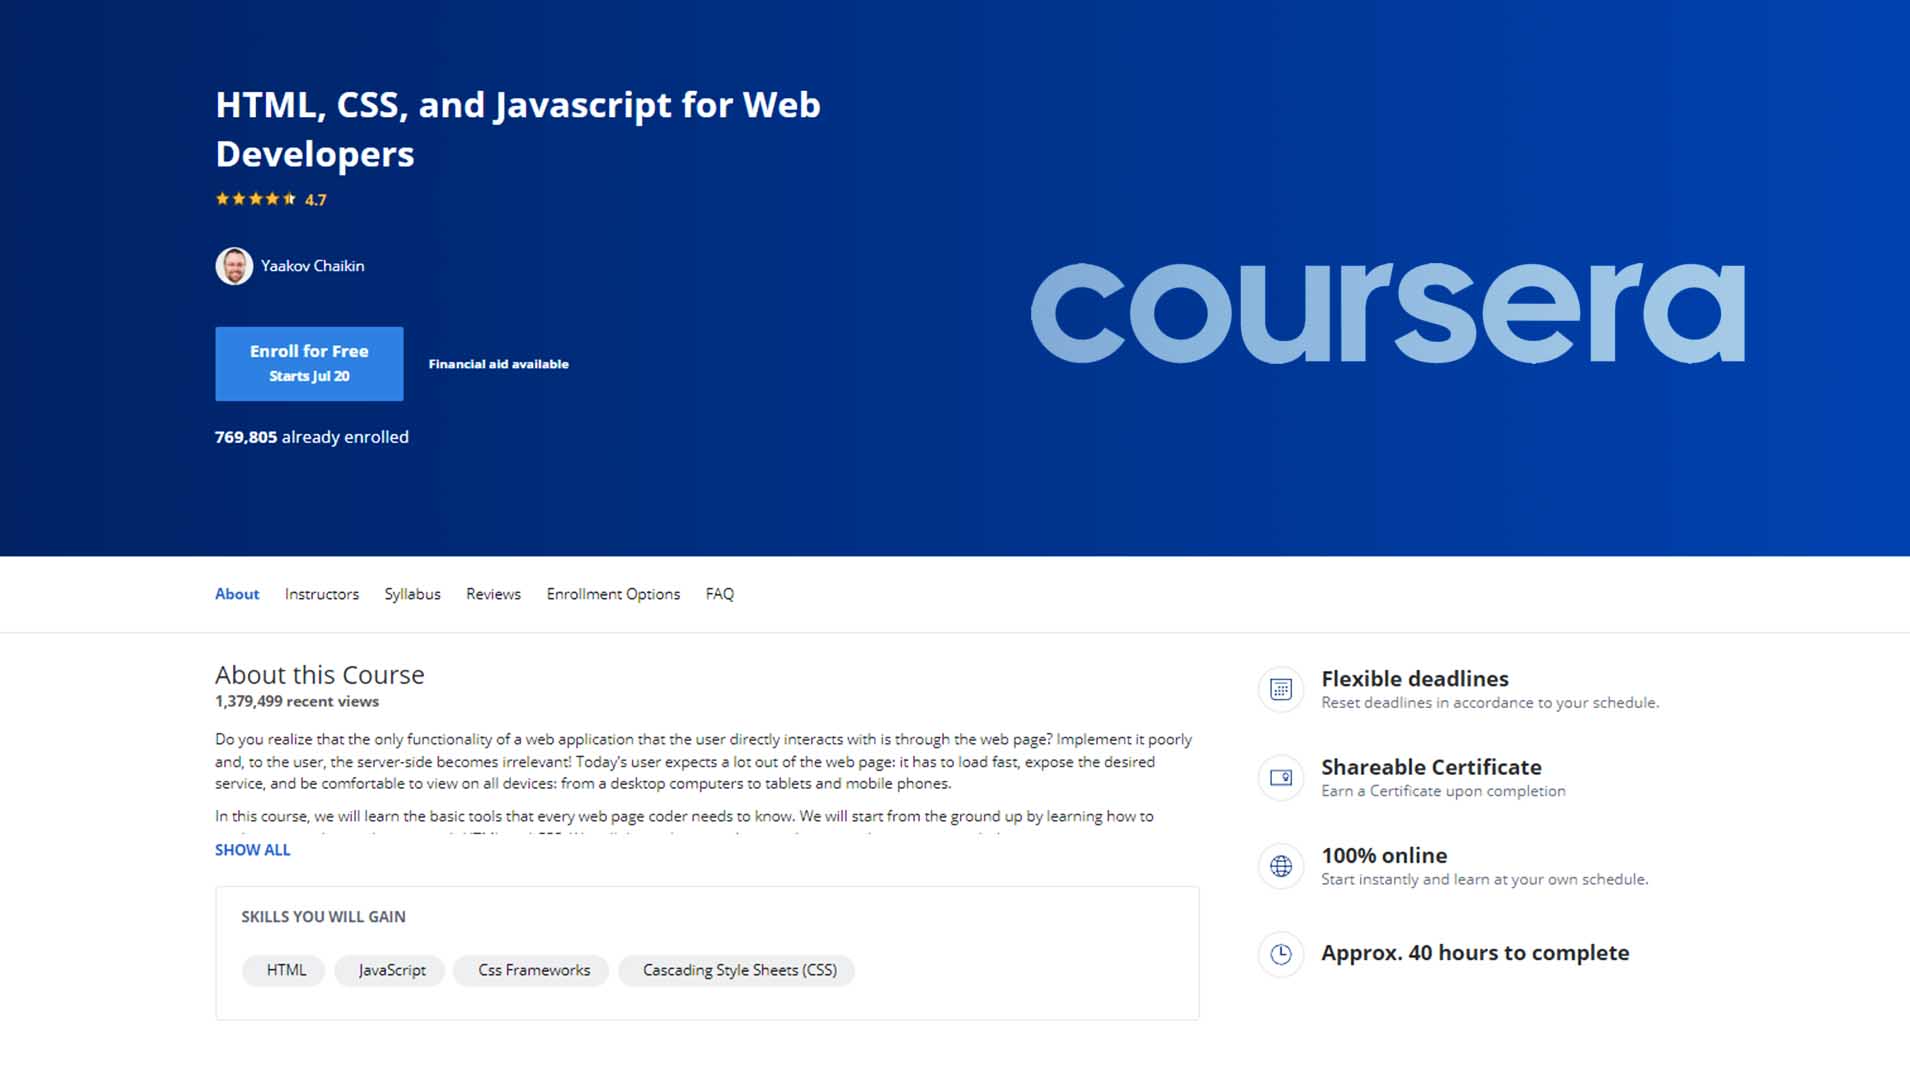 HTML, CSS, and Javascript for Web Developers